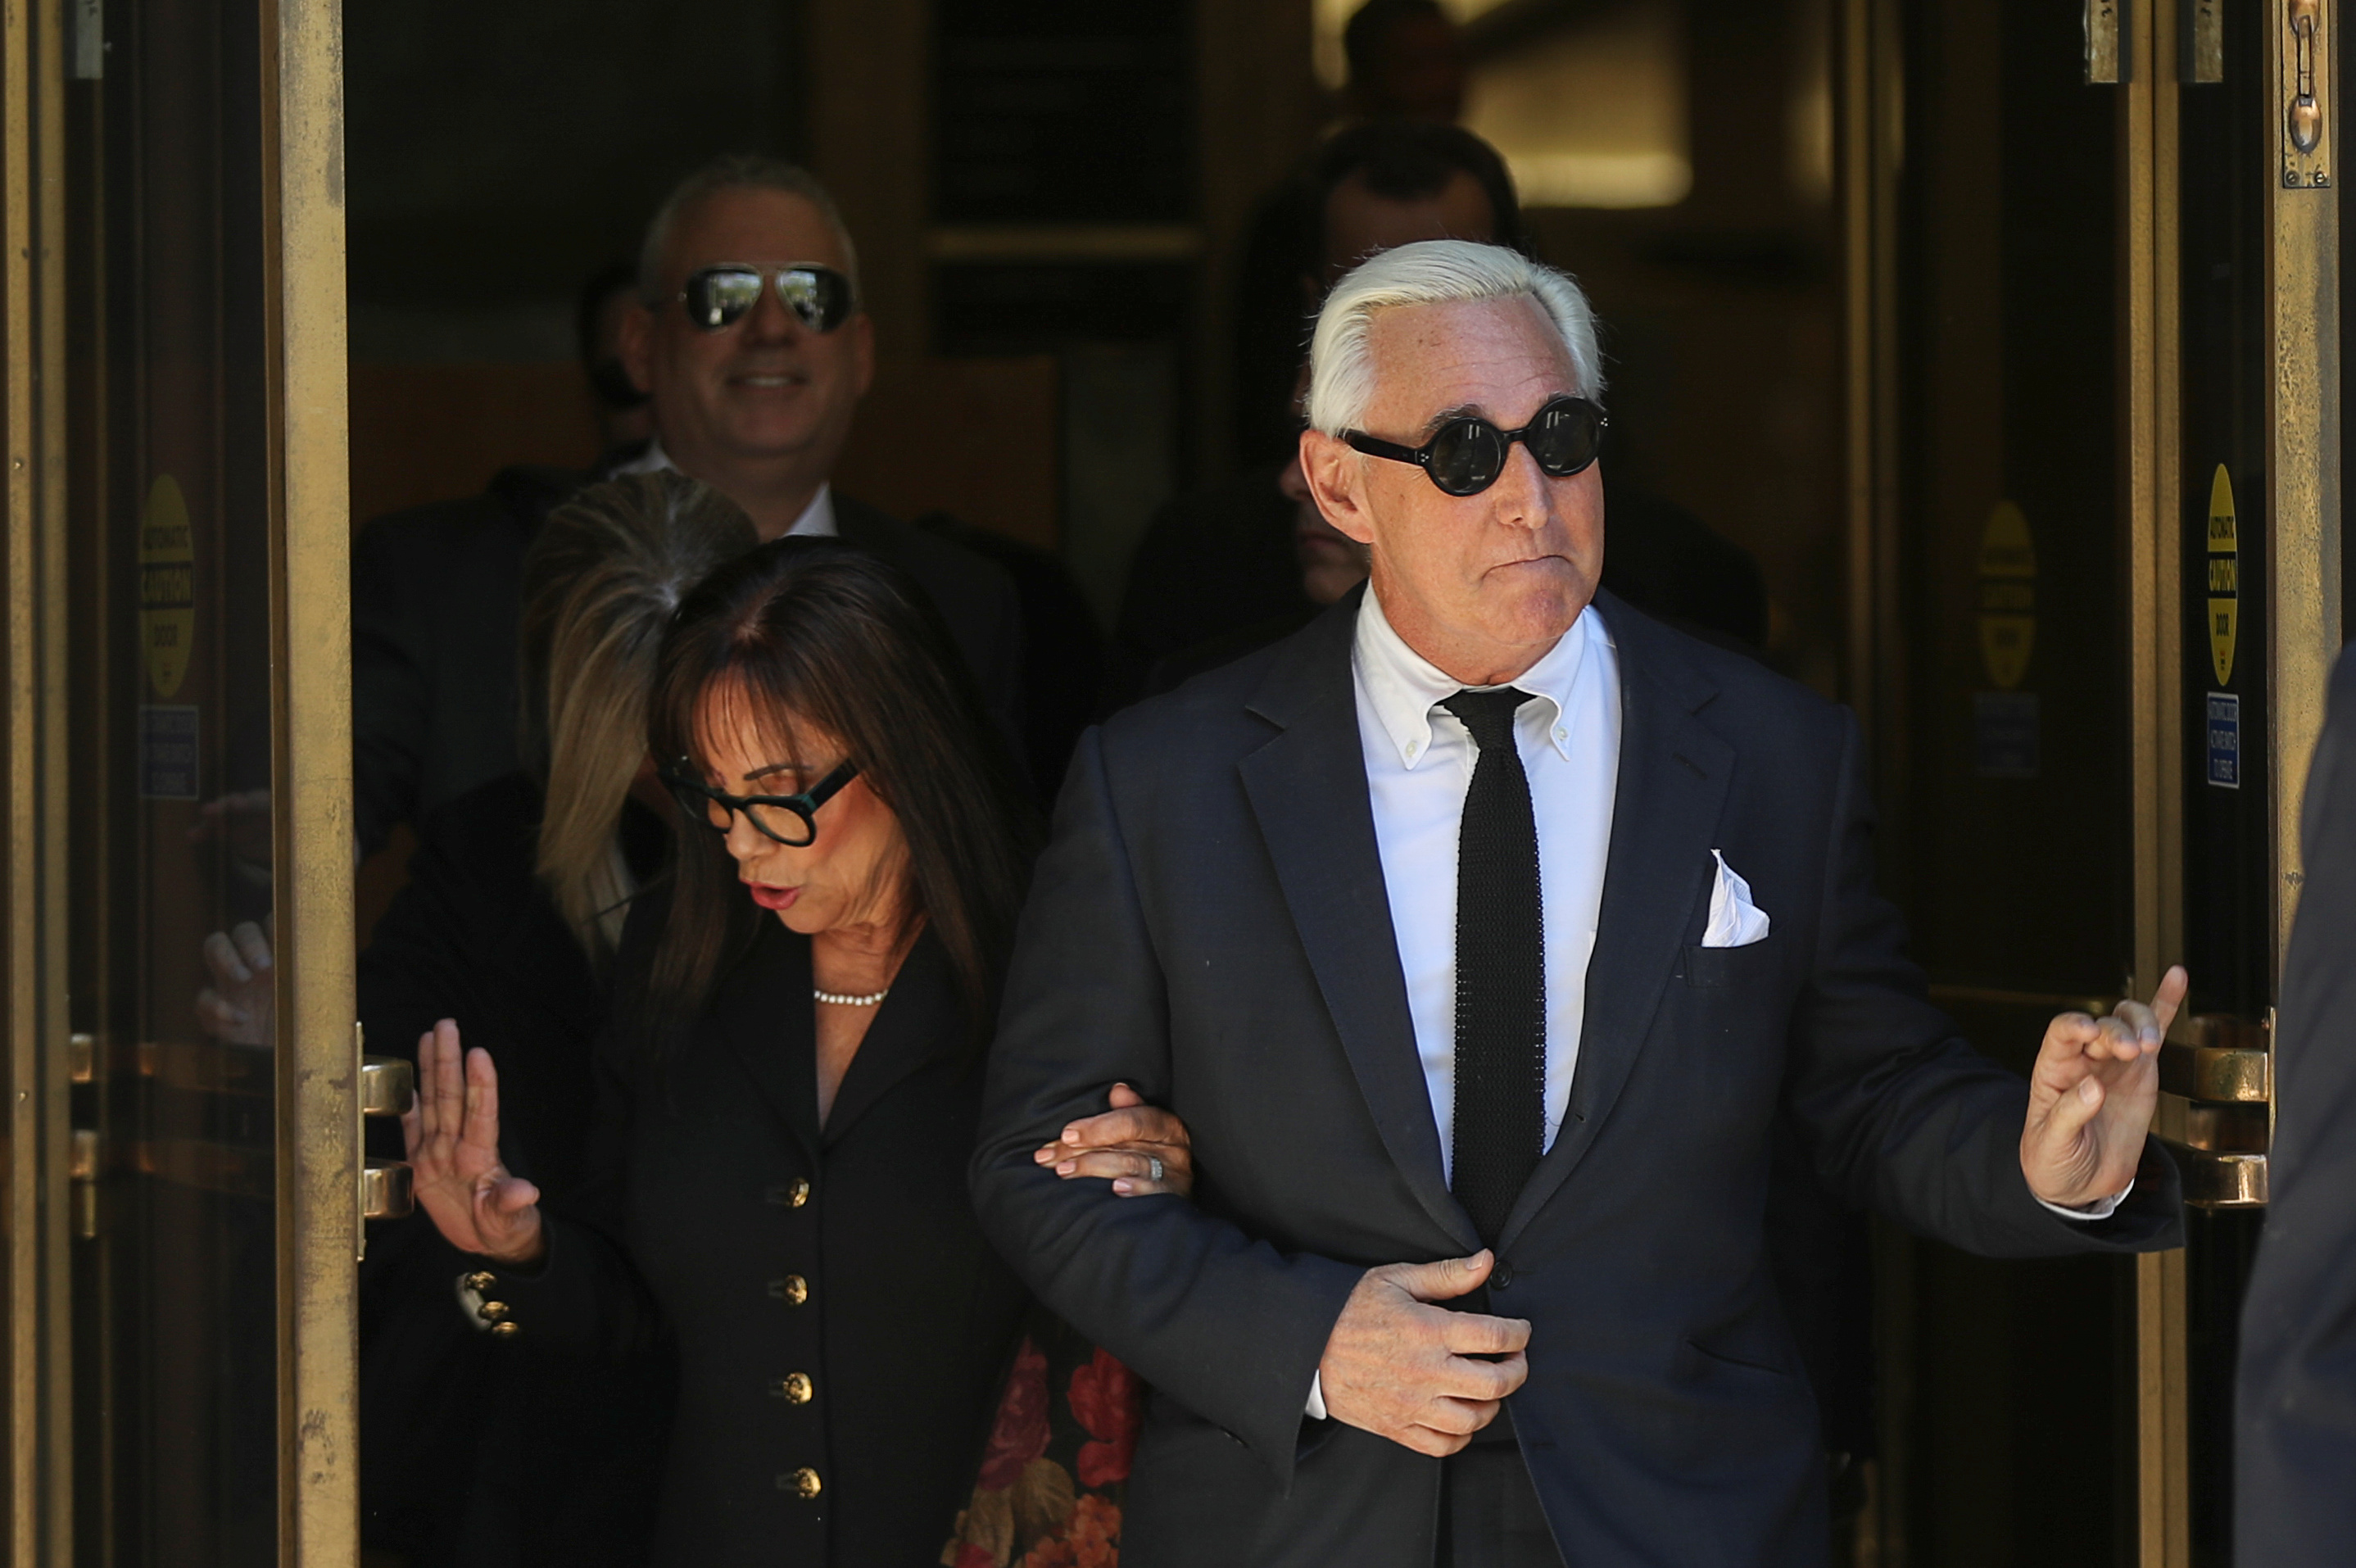 Roger Stone, former campaign adviser to U.S. President Donald Trump, is accompanied by his wife Nydia as he departs following a pre-trial hearing at U.S. District Court in Washington, U.S., November 4, 2019. REUTERS/Siphiwe Sibeko 